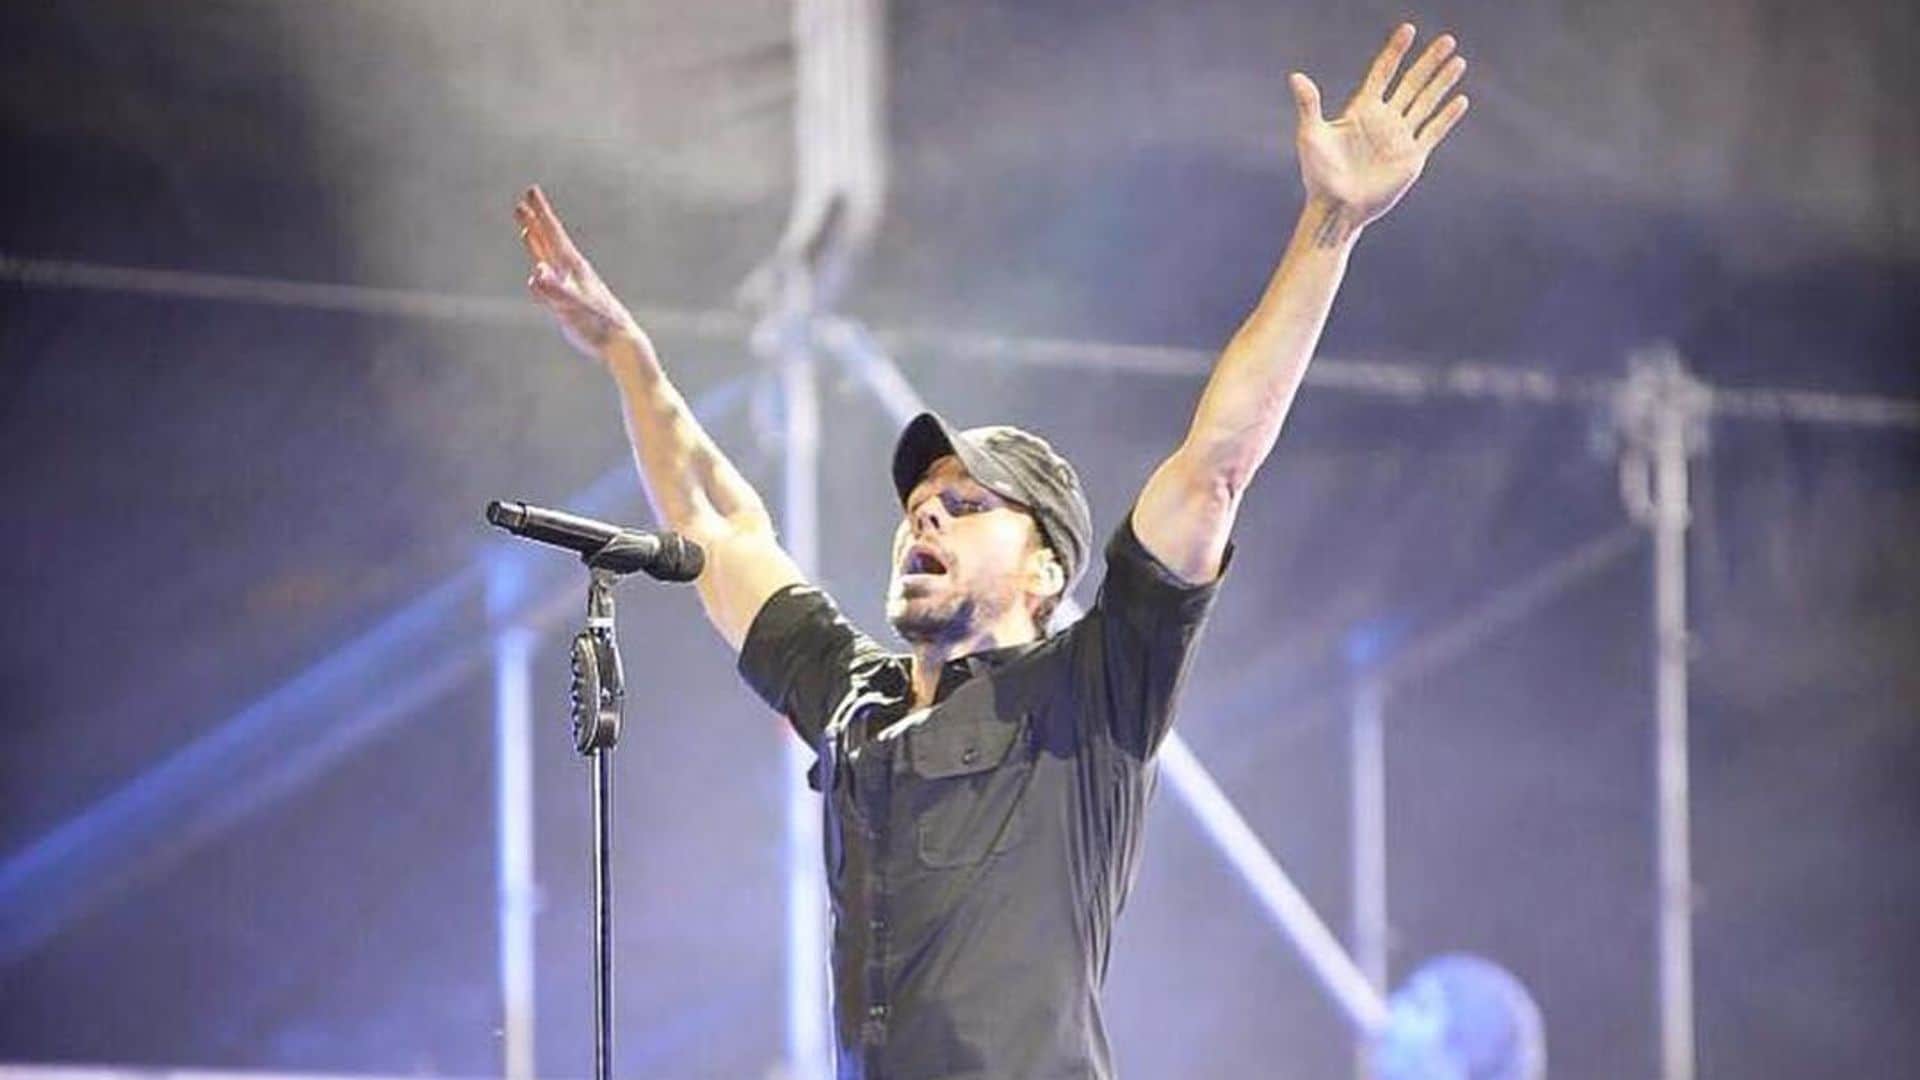 Enrique Iglesias is counting down to something big – and fans are puzzled!